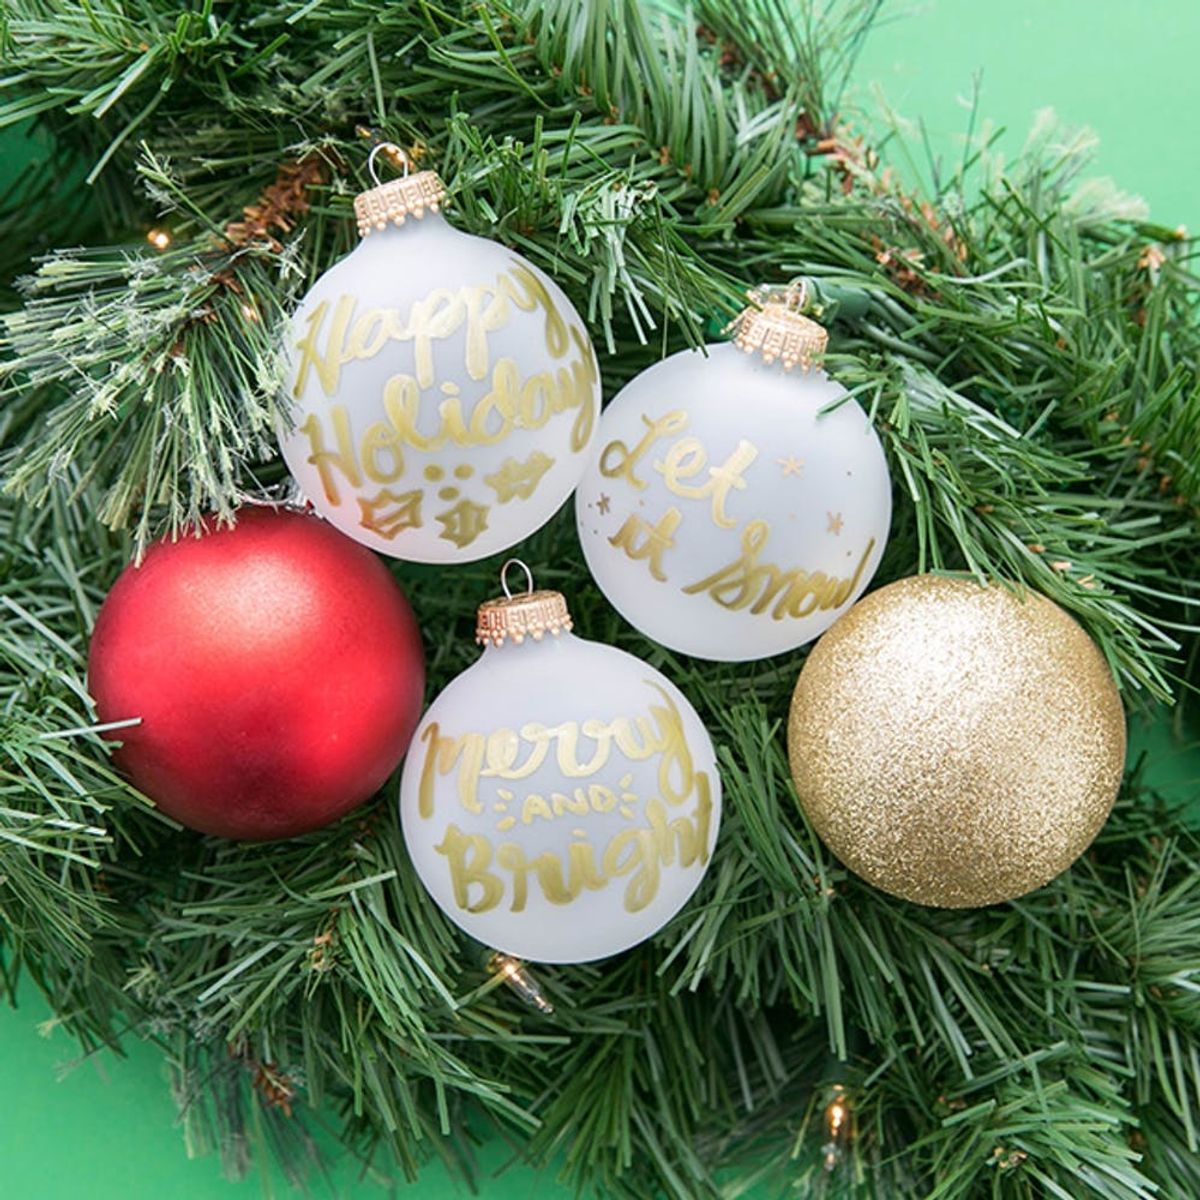 DIY Holiday Ornaments With This FREE Lettering Guide